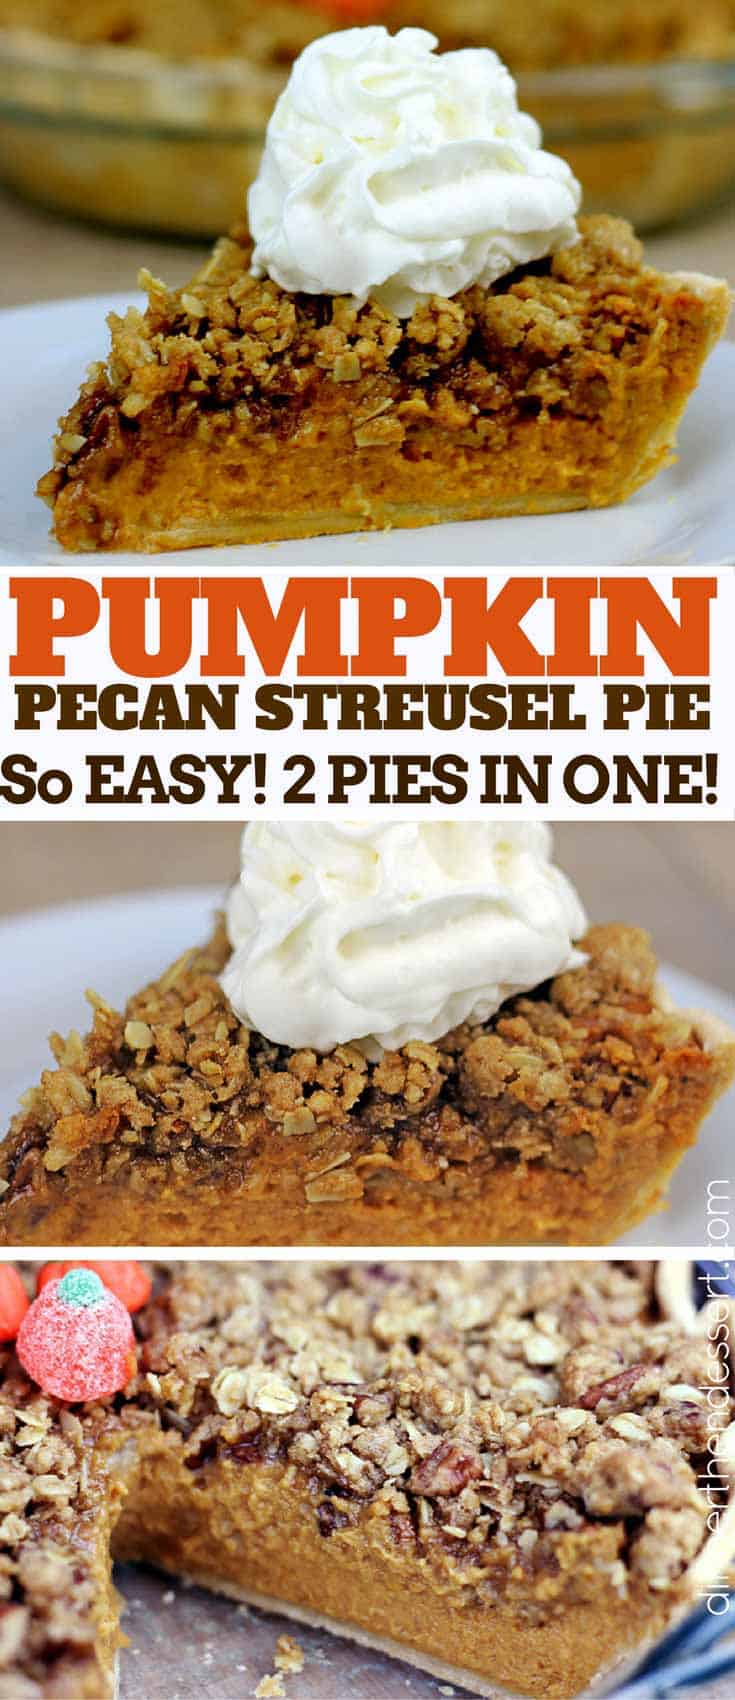 The only pie you'll need on your Thanksgiving dessert table, delicious Pumpkin pie with dark brown sugar topped with a Rich Pecan Streusel topping. 